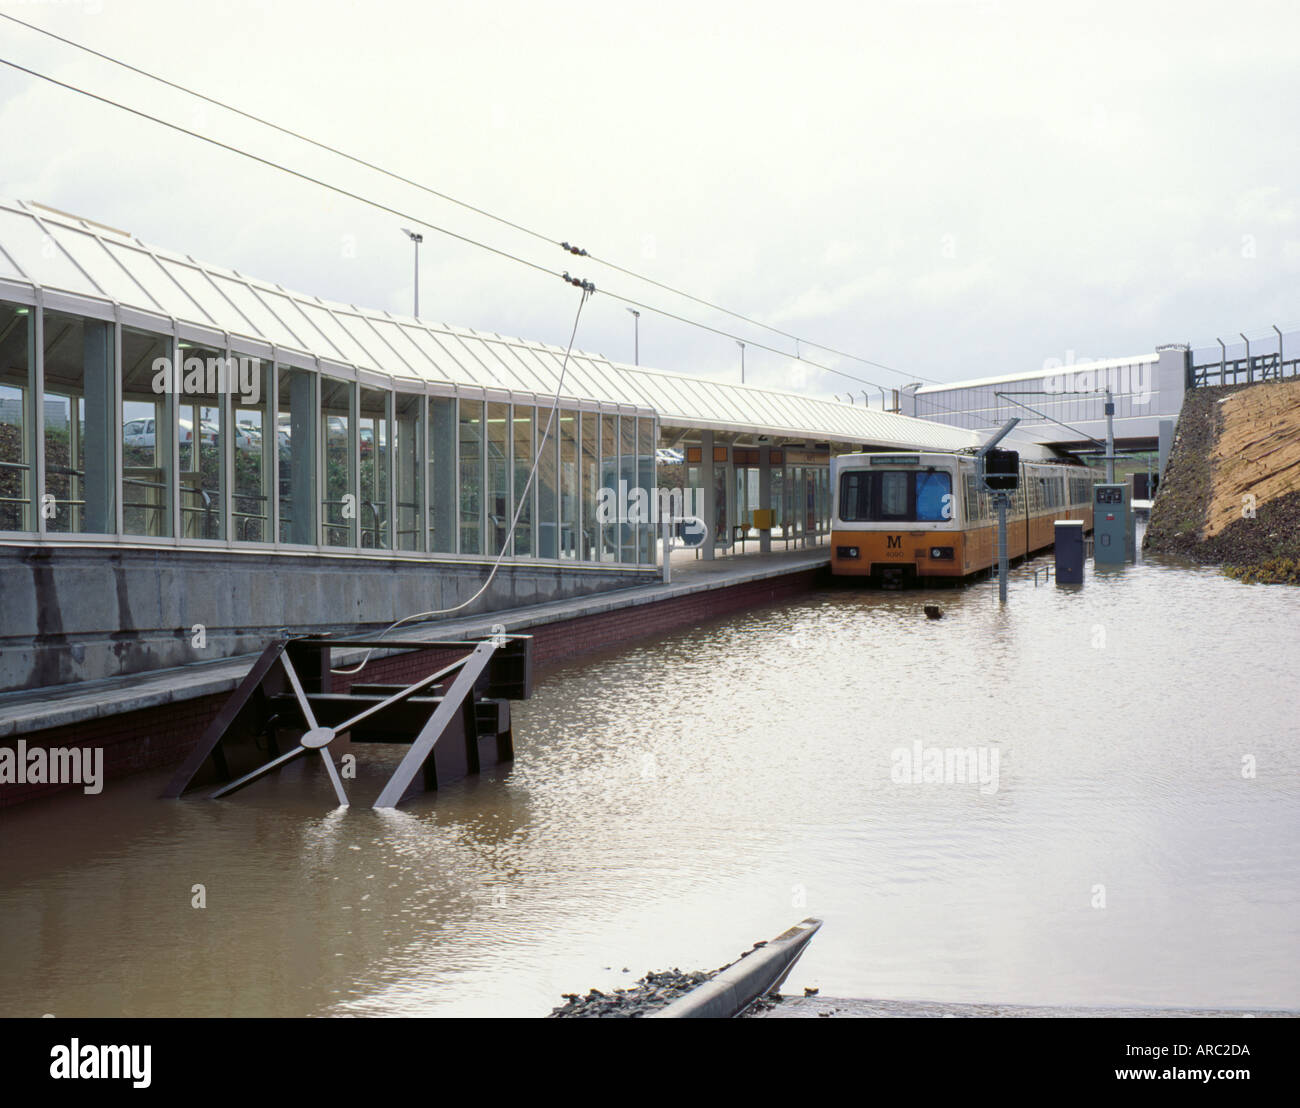 Flooding of Tyneside Metro Station, by very heavy rainfall, at Newcastle Airport, Woolsington, Tyne and Wear, England, UK. Stock Photo